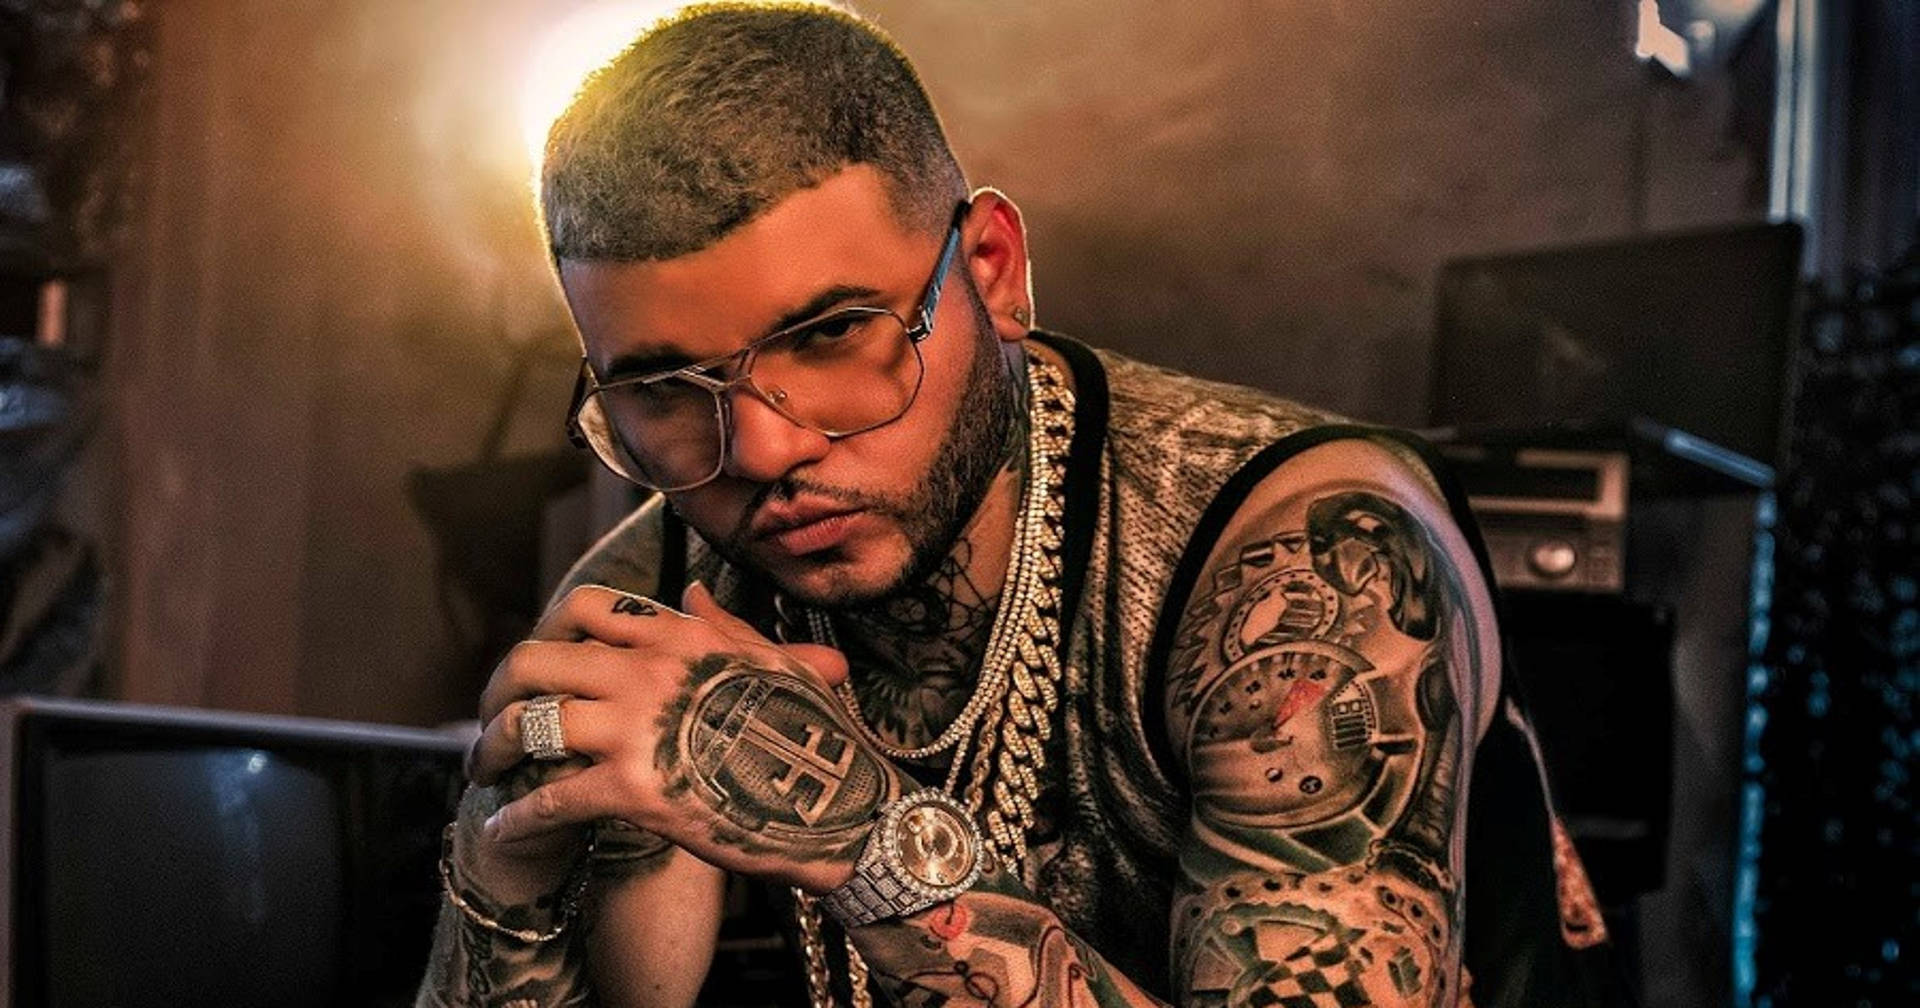 Cool Farruko With Tattoos Background